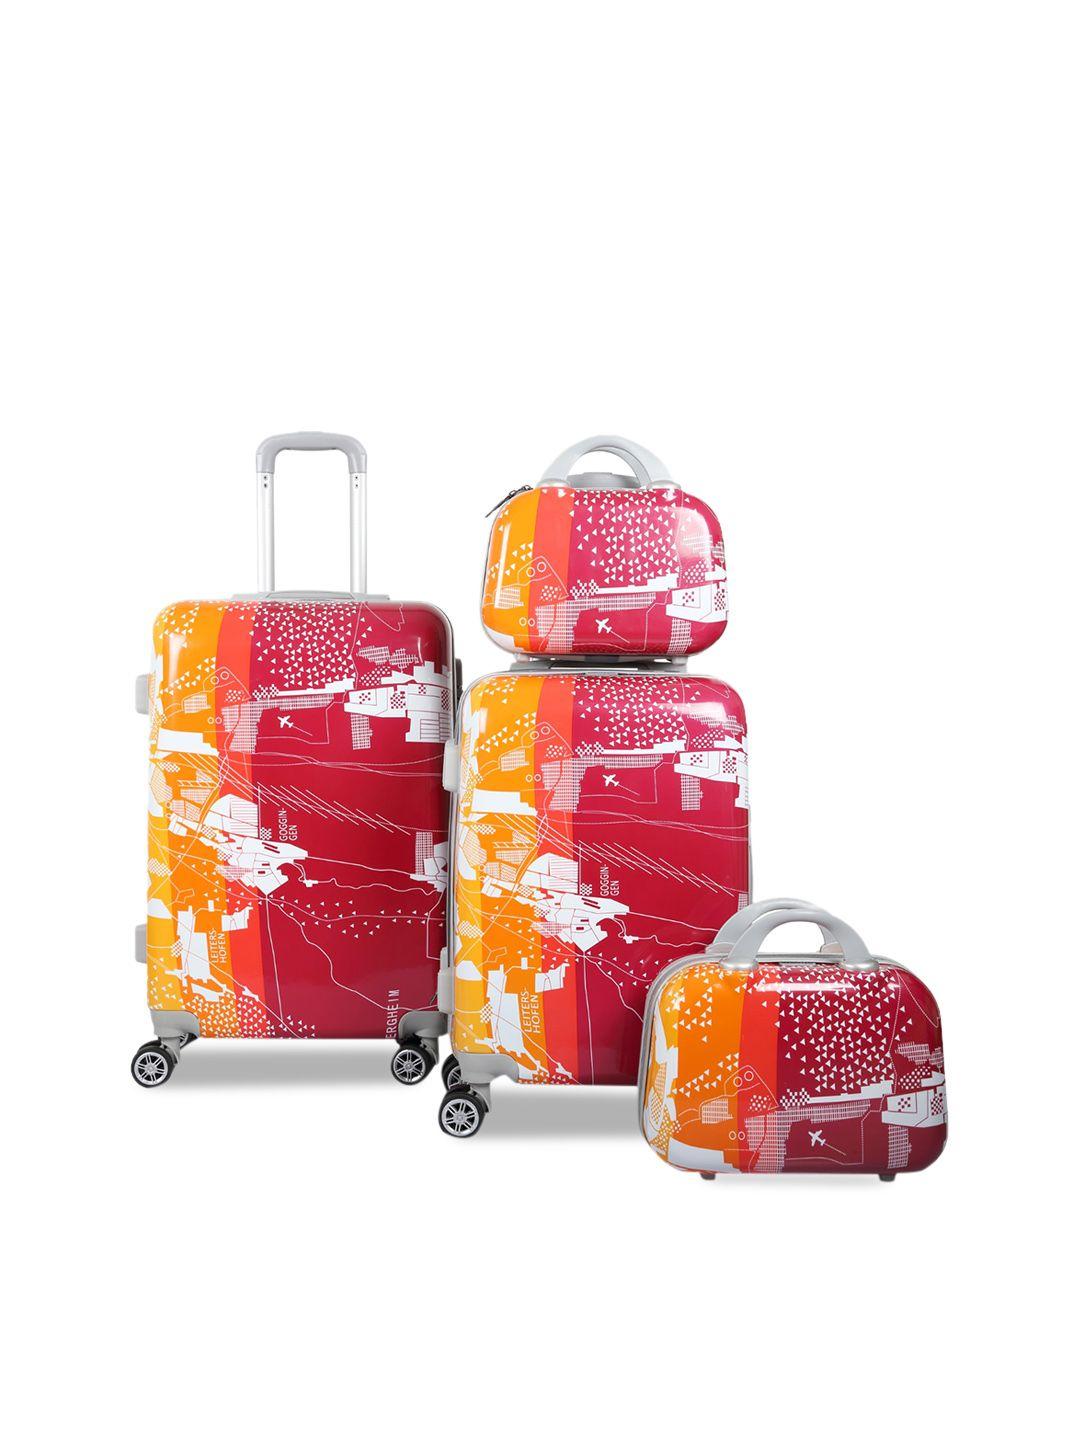 polo class red & orange 4-pieces printed hard case luggage trolley & vanity bag set